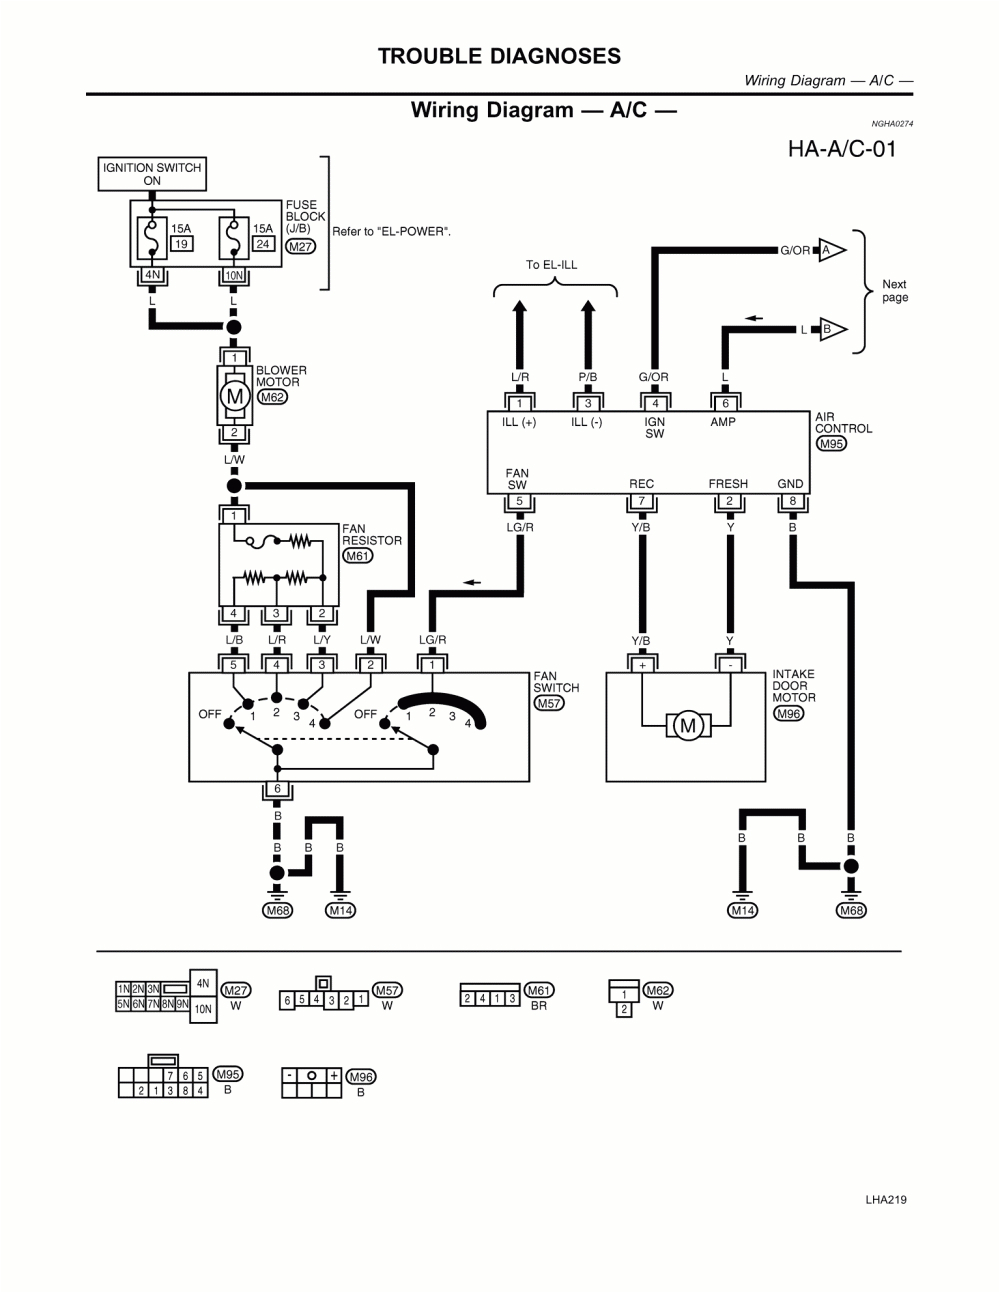 2006 nissan frontier engine diagram pictures nissan xterra wiring diagram nissan xterra wiring diagram gif